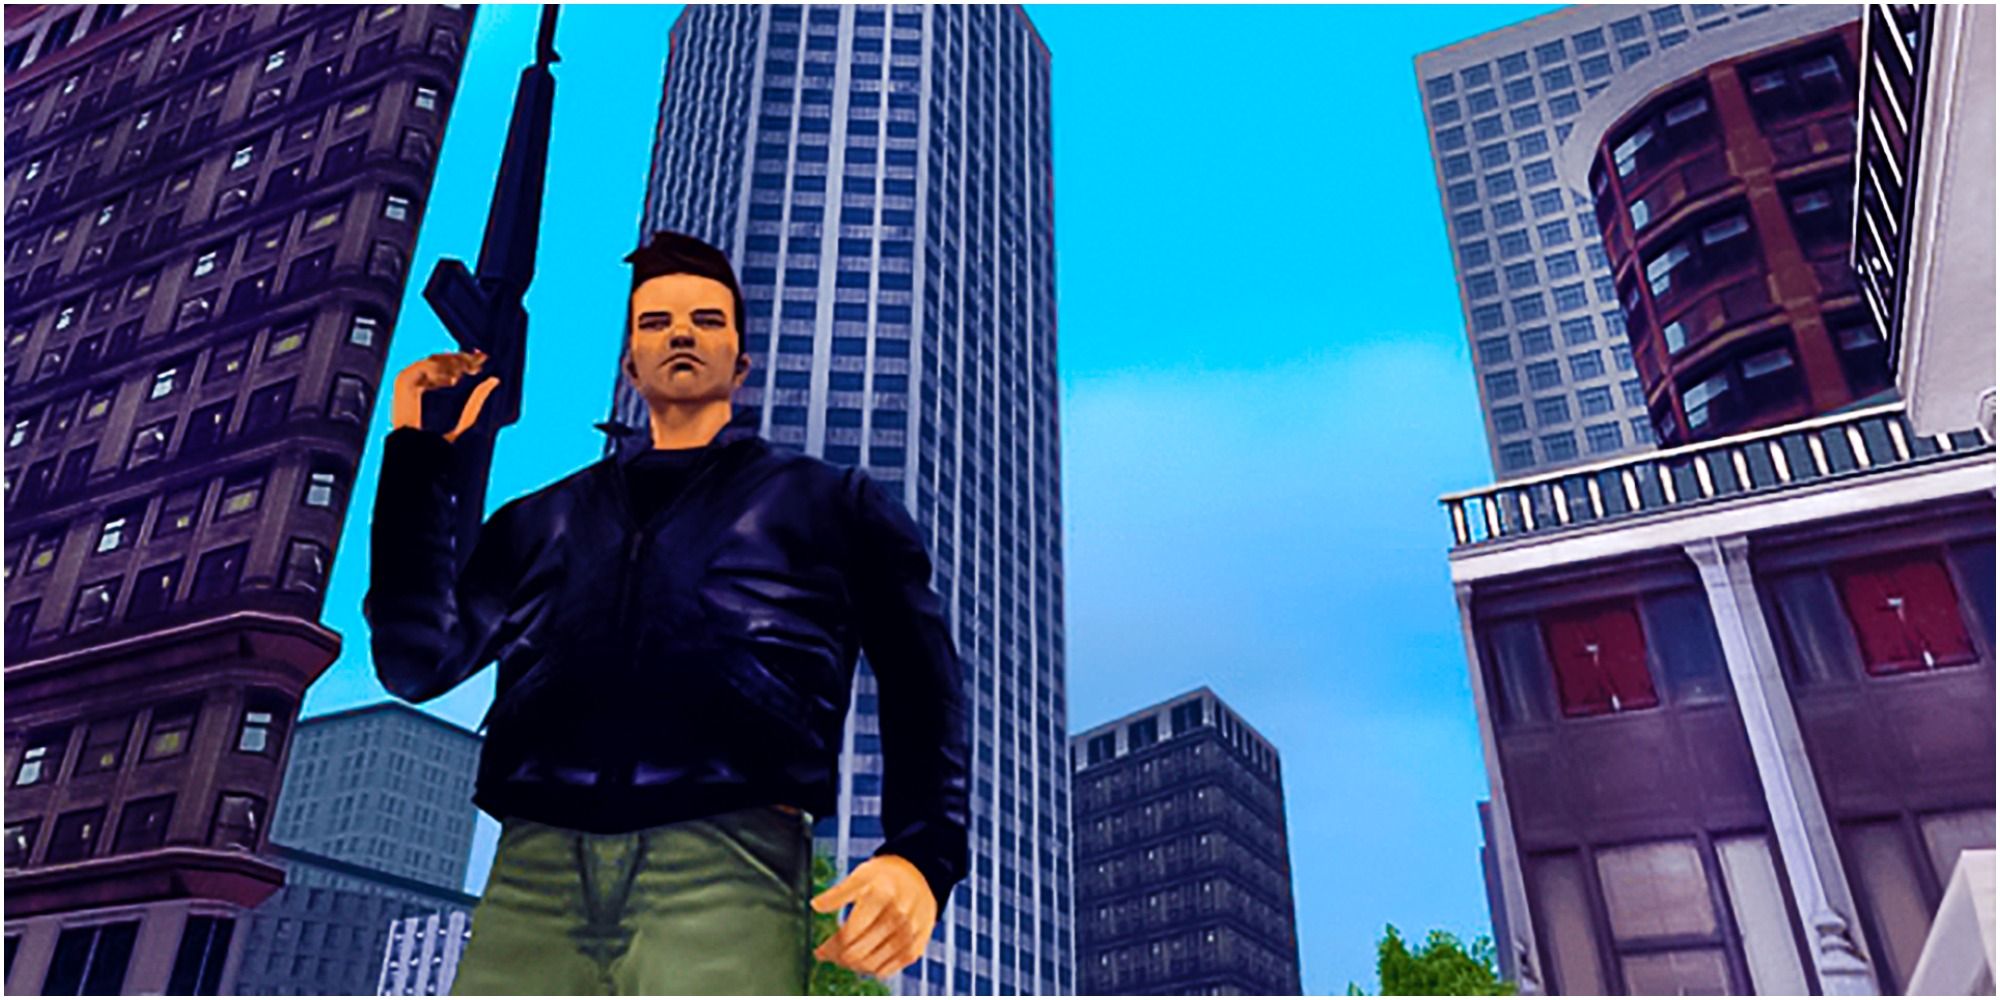 main character holding a gun in the city